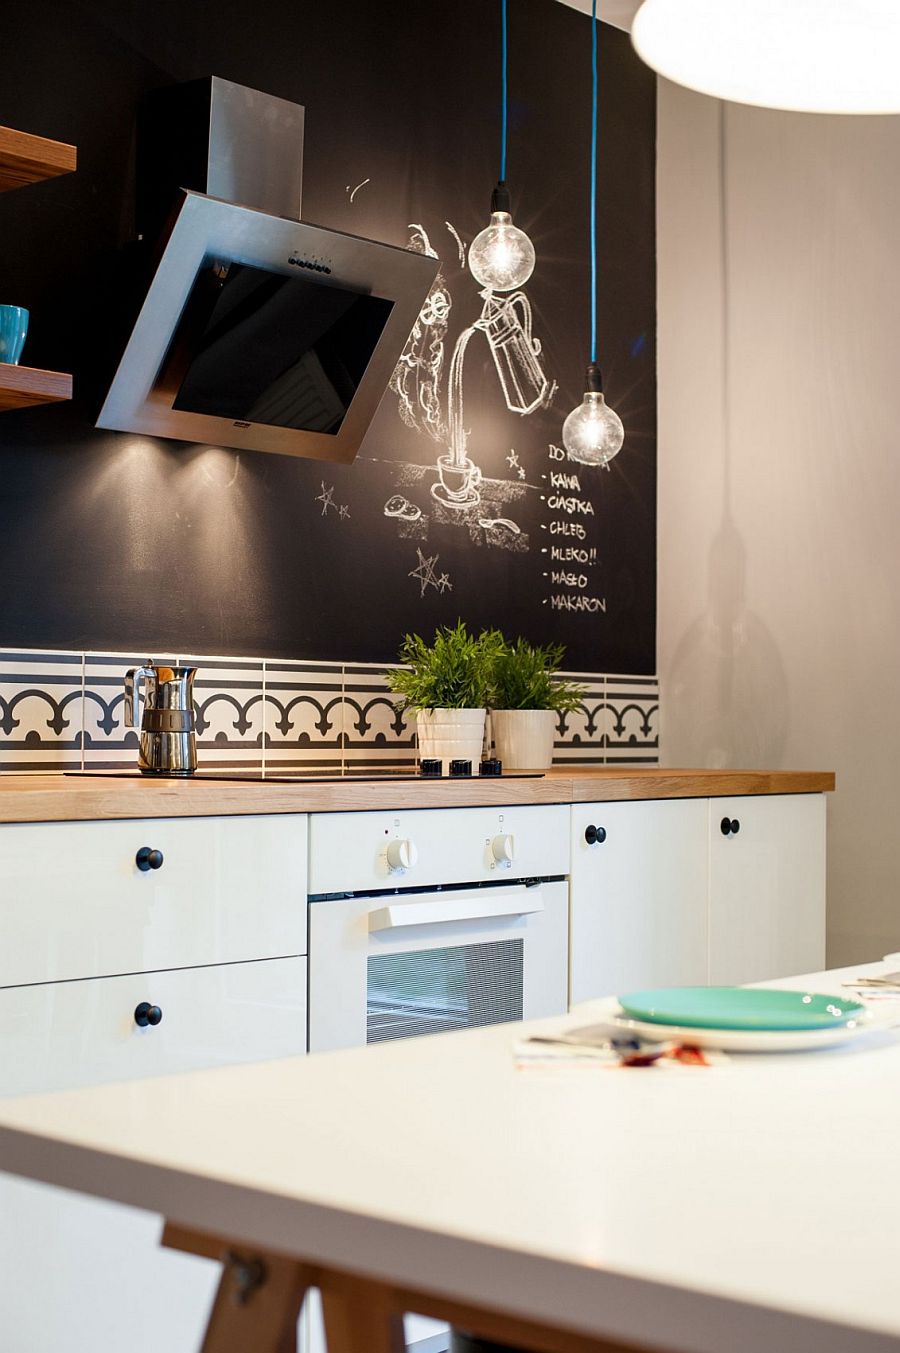 Chalkboard wall in the kitchen adds spunk to the interior